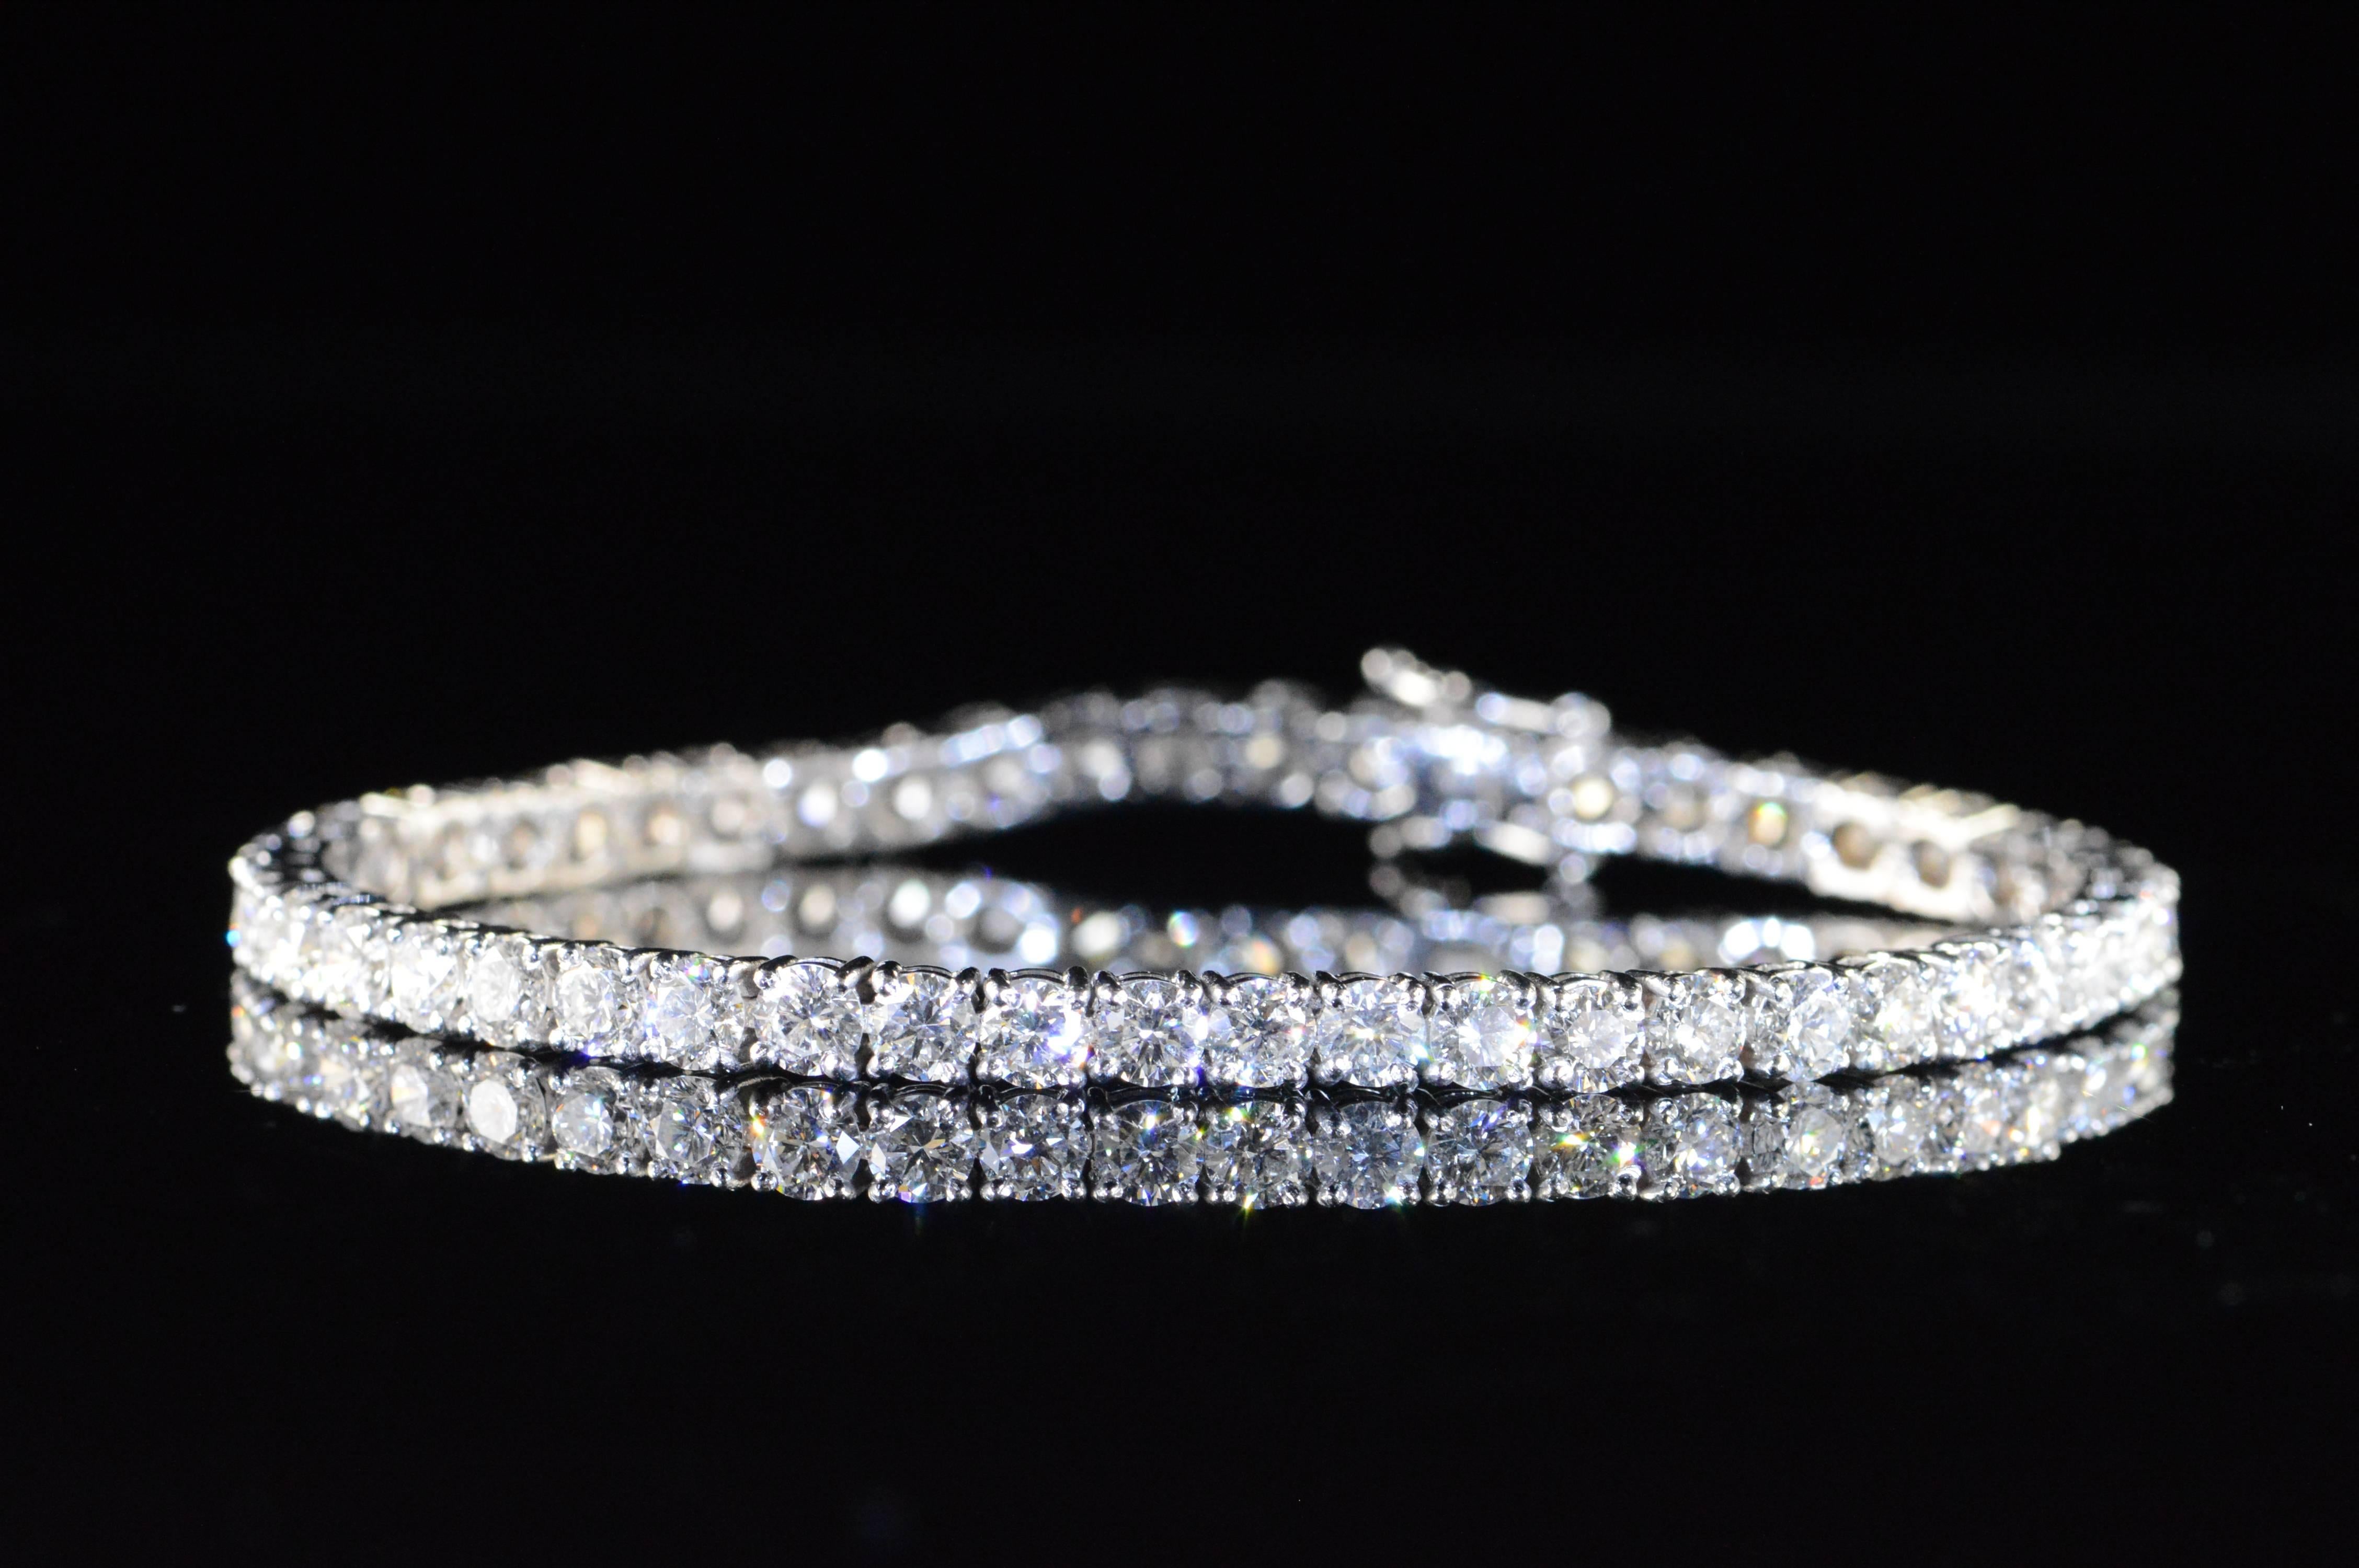 A diamond tennis bracelet is a staple of any woman’s jewelry collection, and this is an exceptional example among tennis bracelets. With over 10 carats of high quality diamonds, this bracelet is guaranteed to turn heads at any event, and its